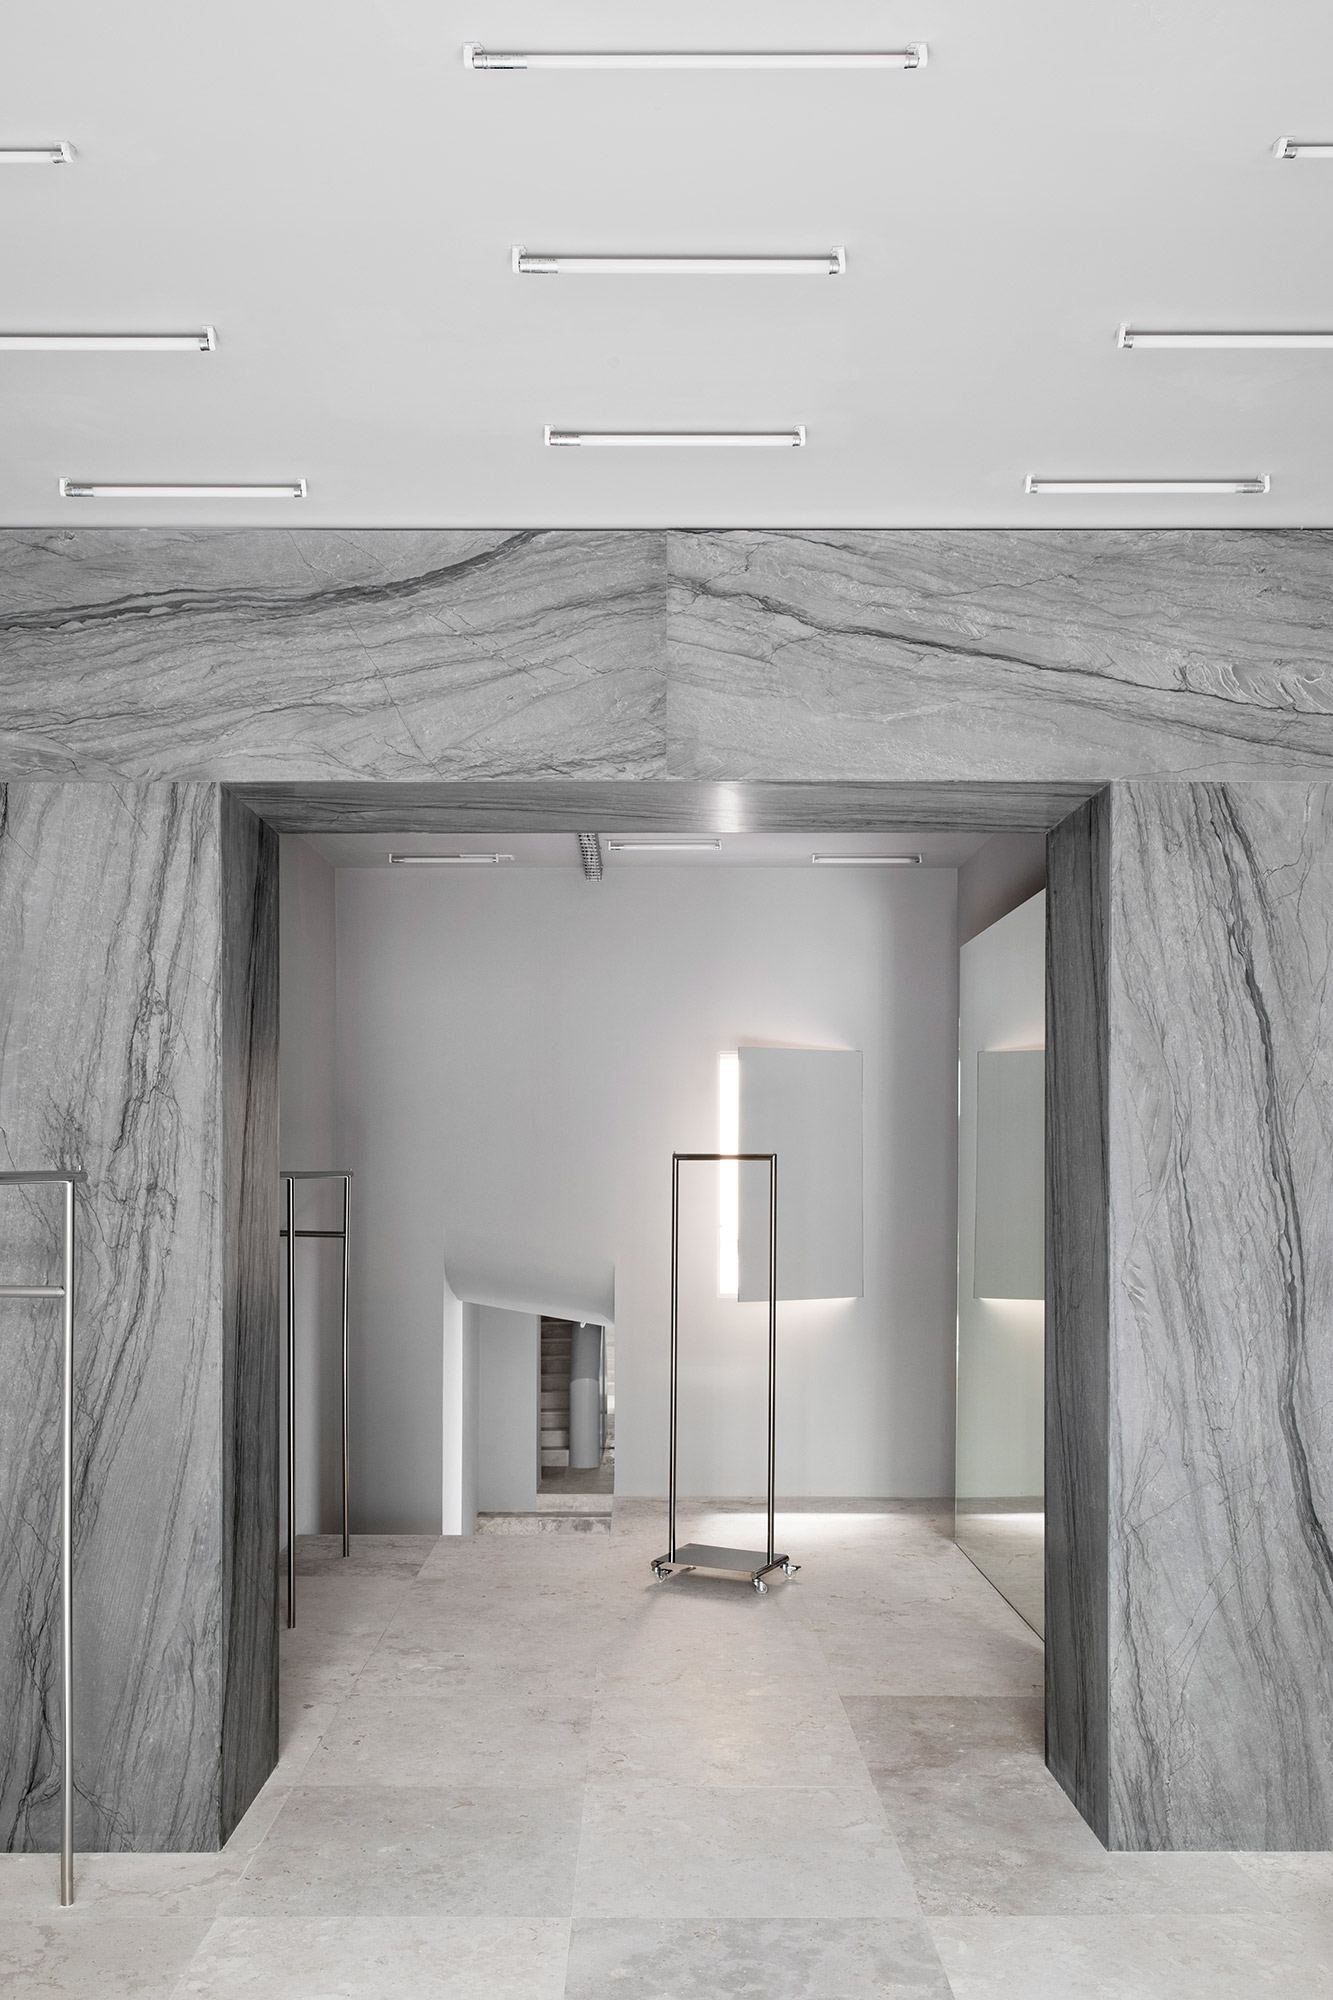 Image of Redondo Brand Store GERMAN SAIZ 3 in {{A monolithic arch in Sensa Platino gives character to a new fashion shop in Madrid}} - Cosentino